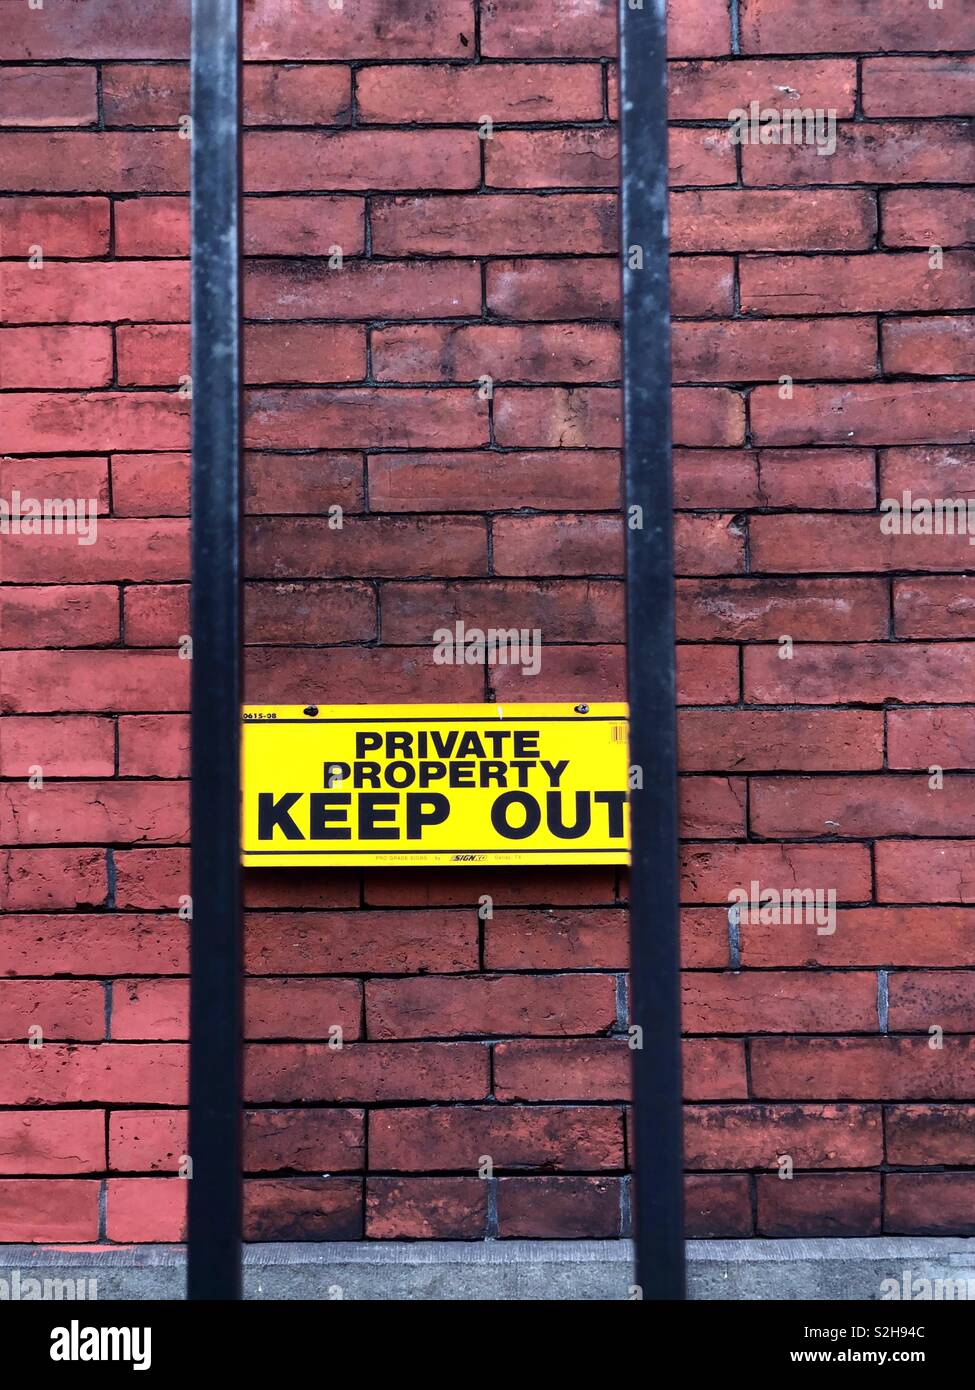 Private property KEEP OUT Stock Photo